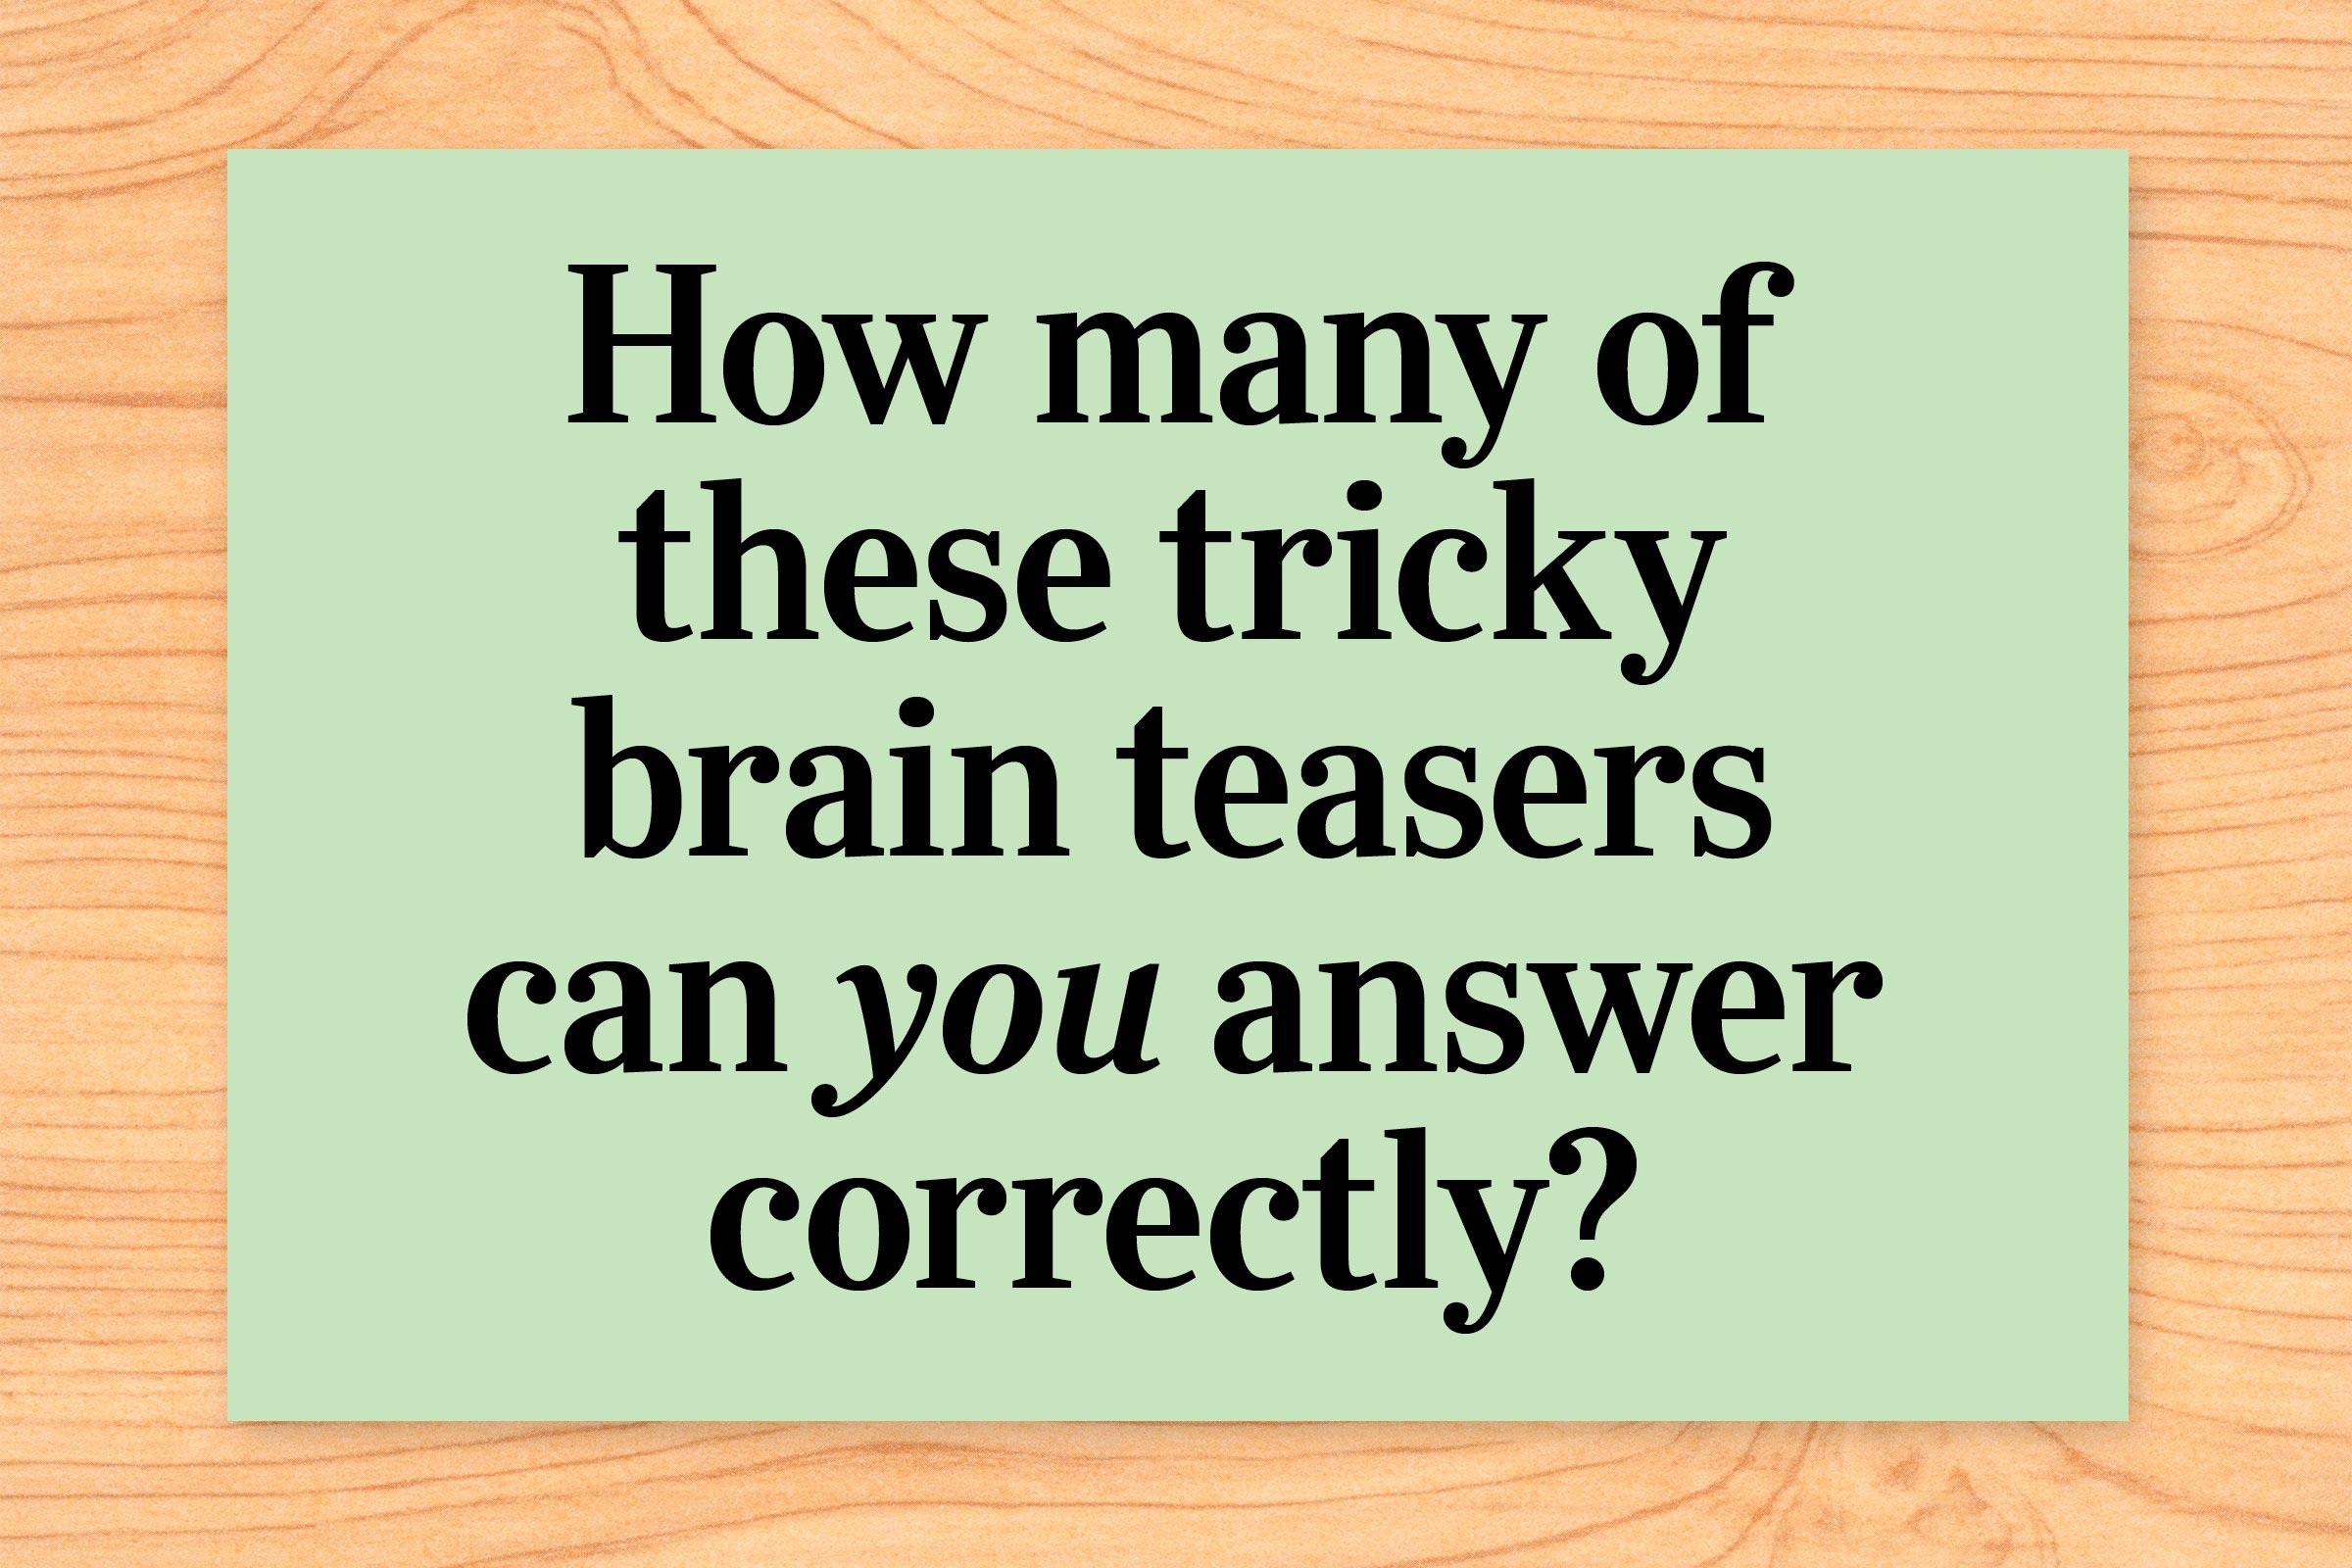 Get Brain Test: Tricky Puzzles Game - Microsoft Store